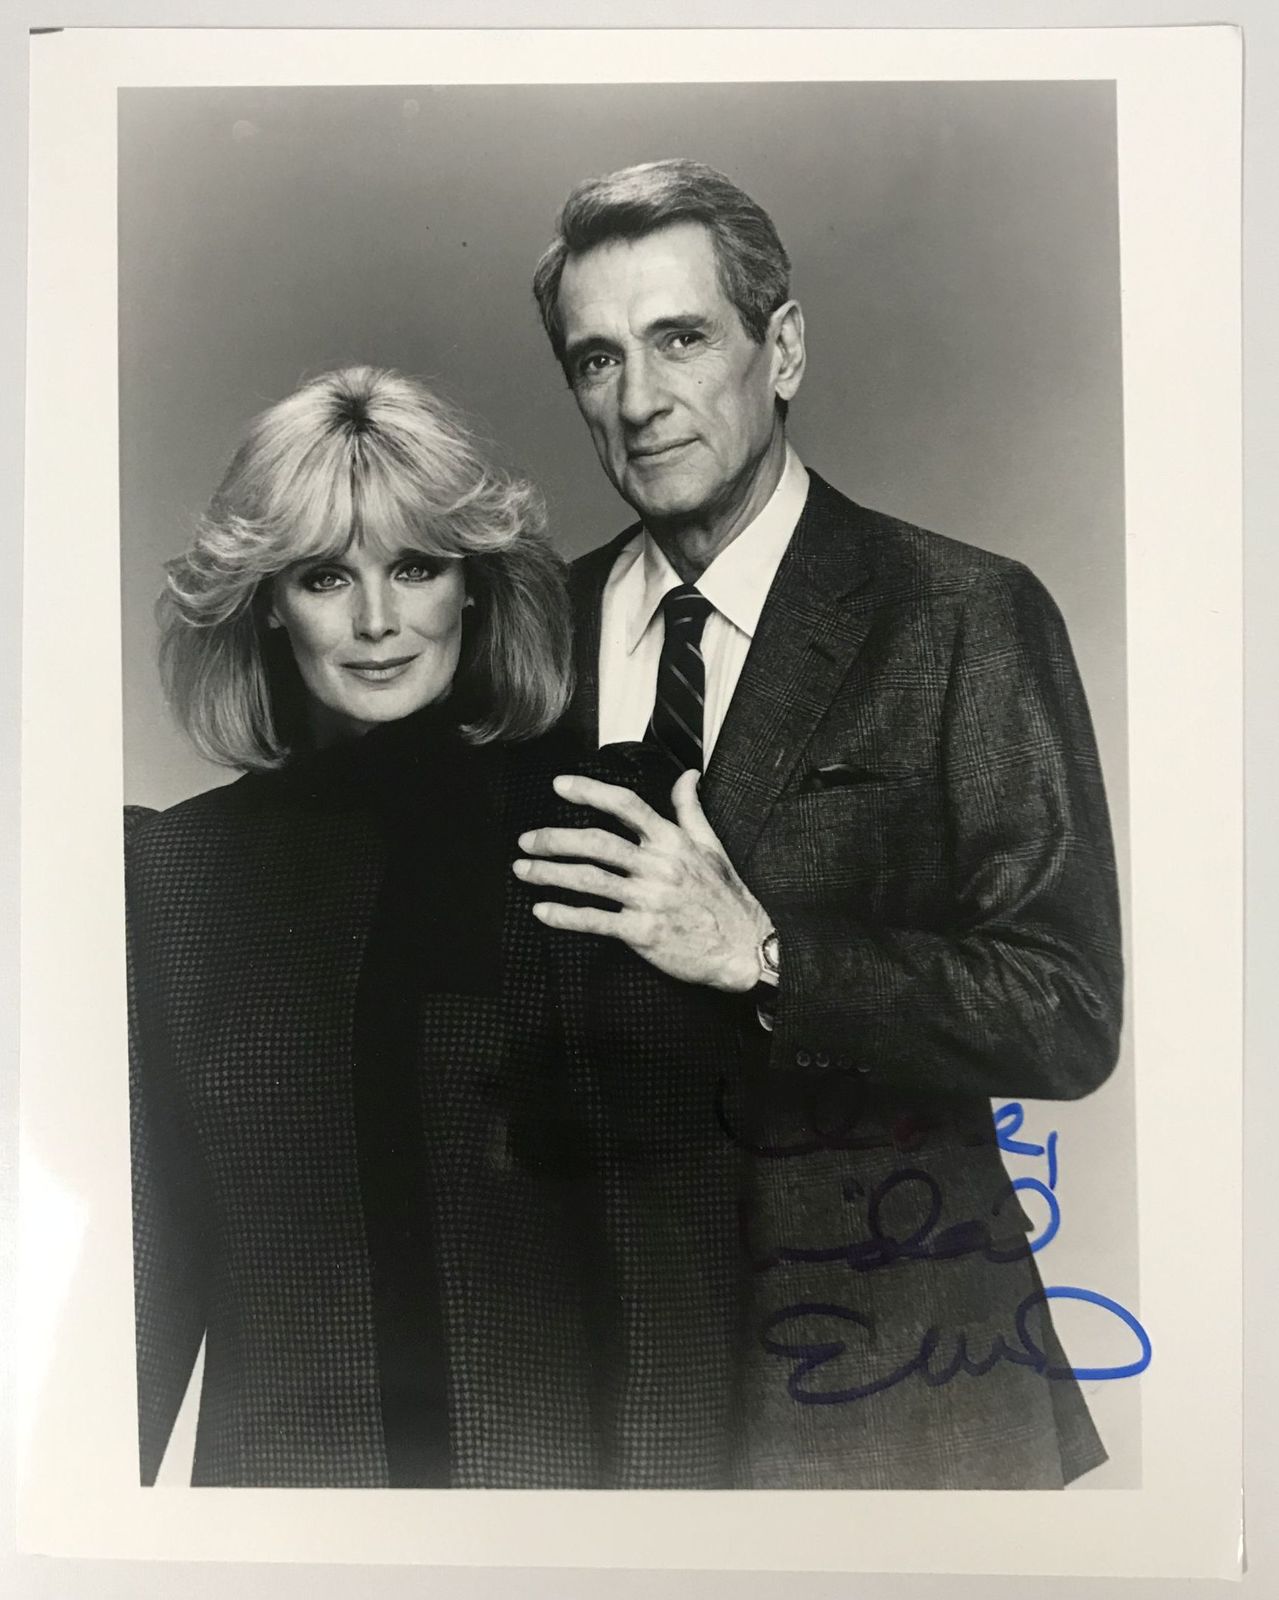 Primary image for Linda Evans Signed Autographed Glossy 8x10 Photo - HOLO COA